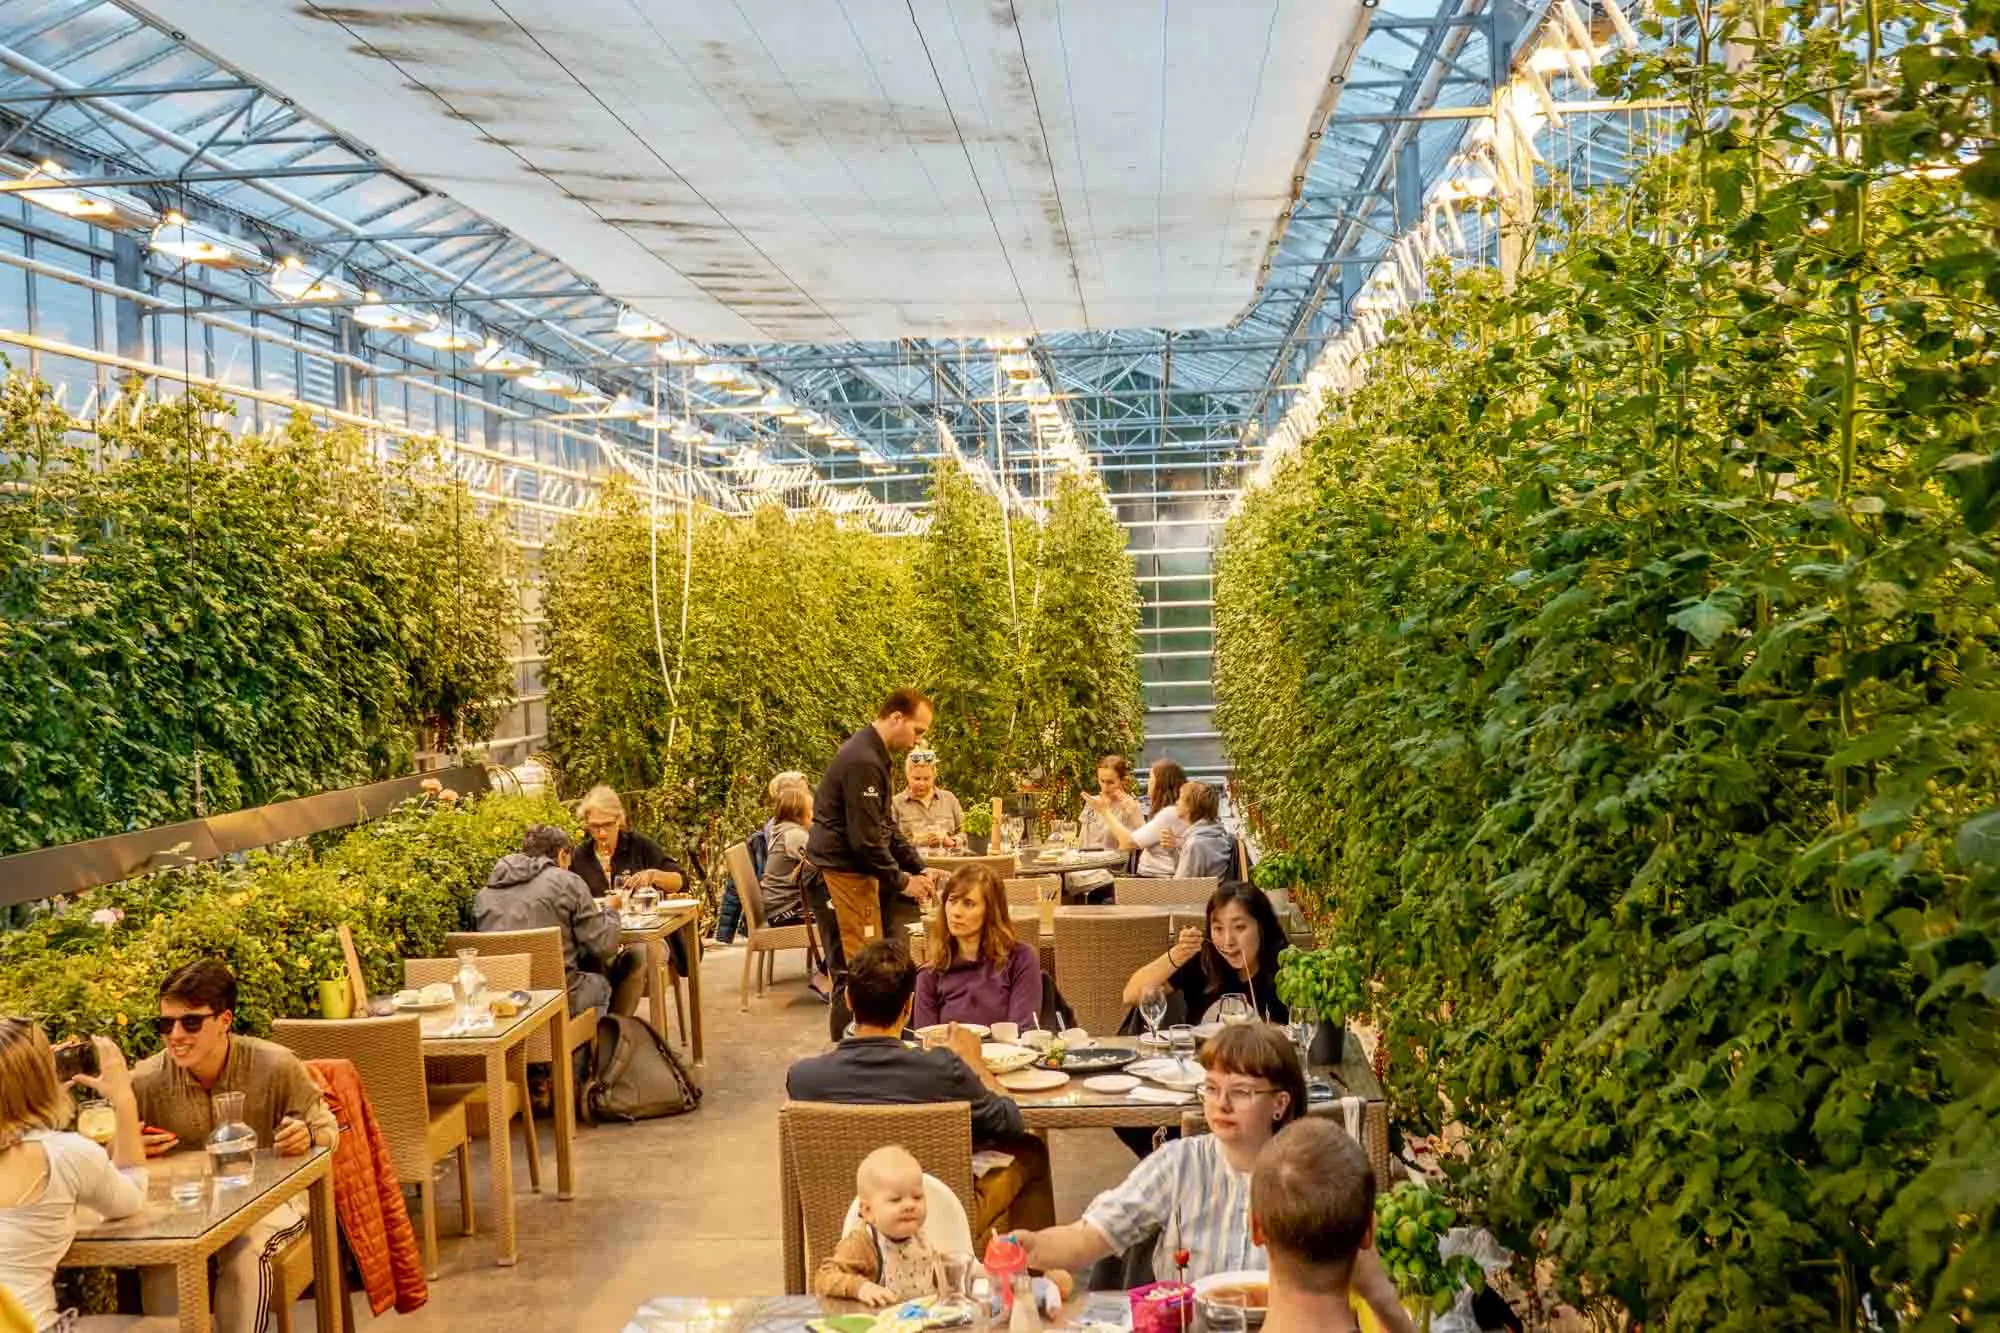 People eating at tables in greenhouse of tomato plants